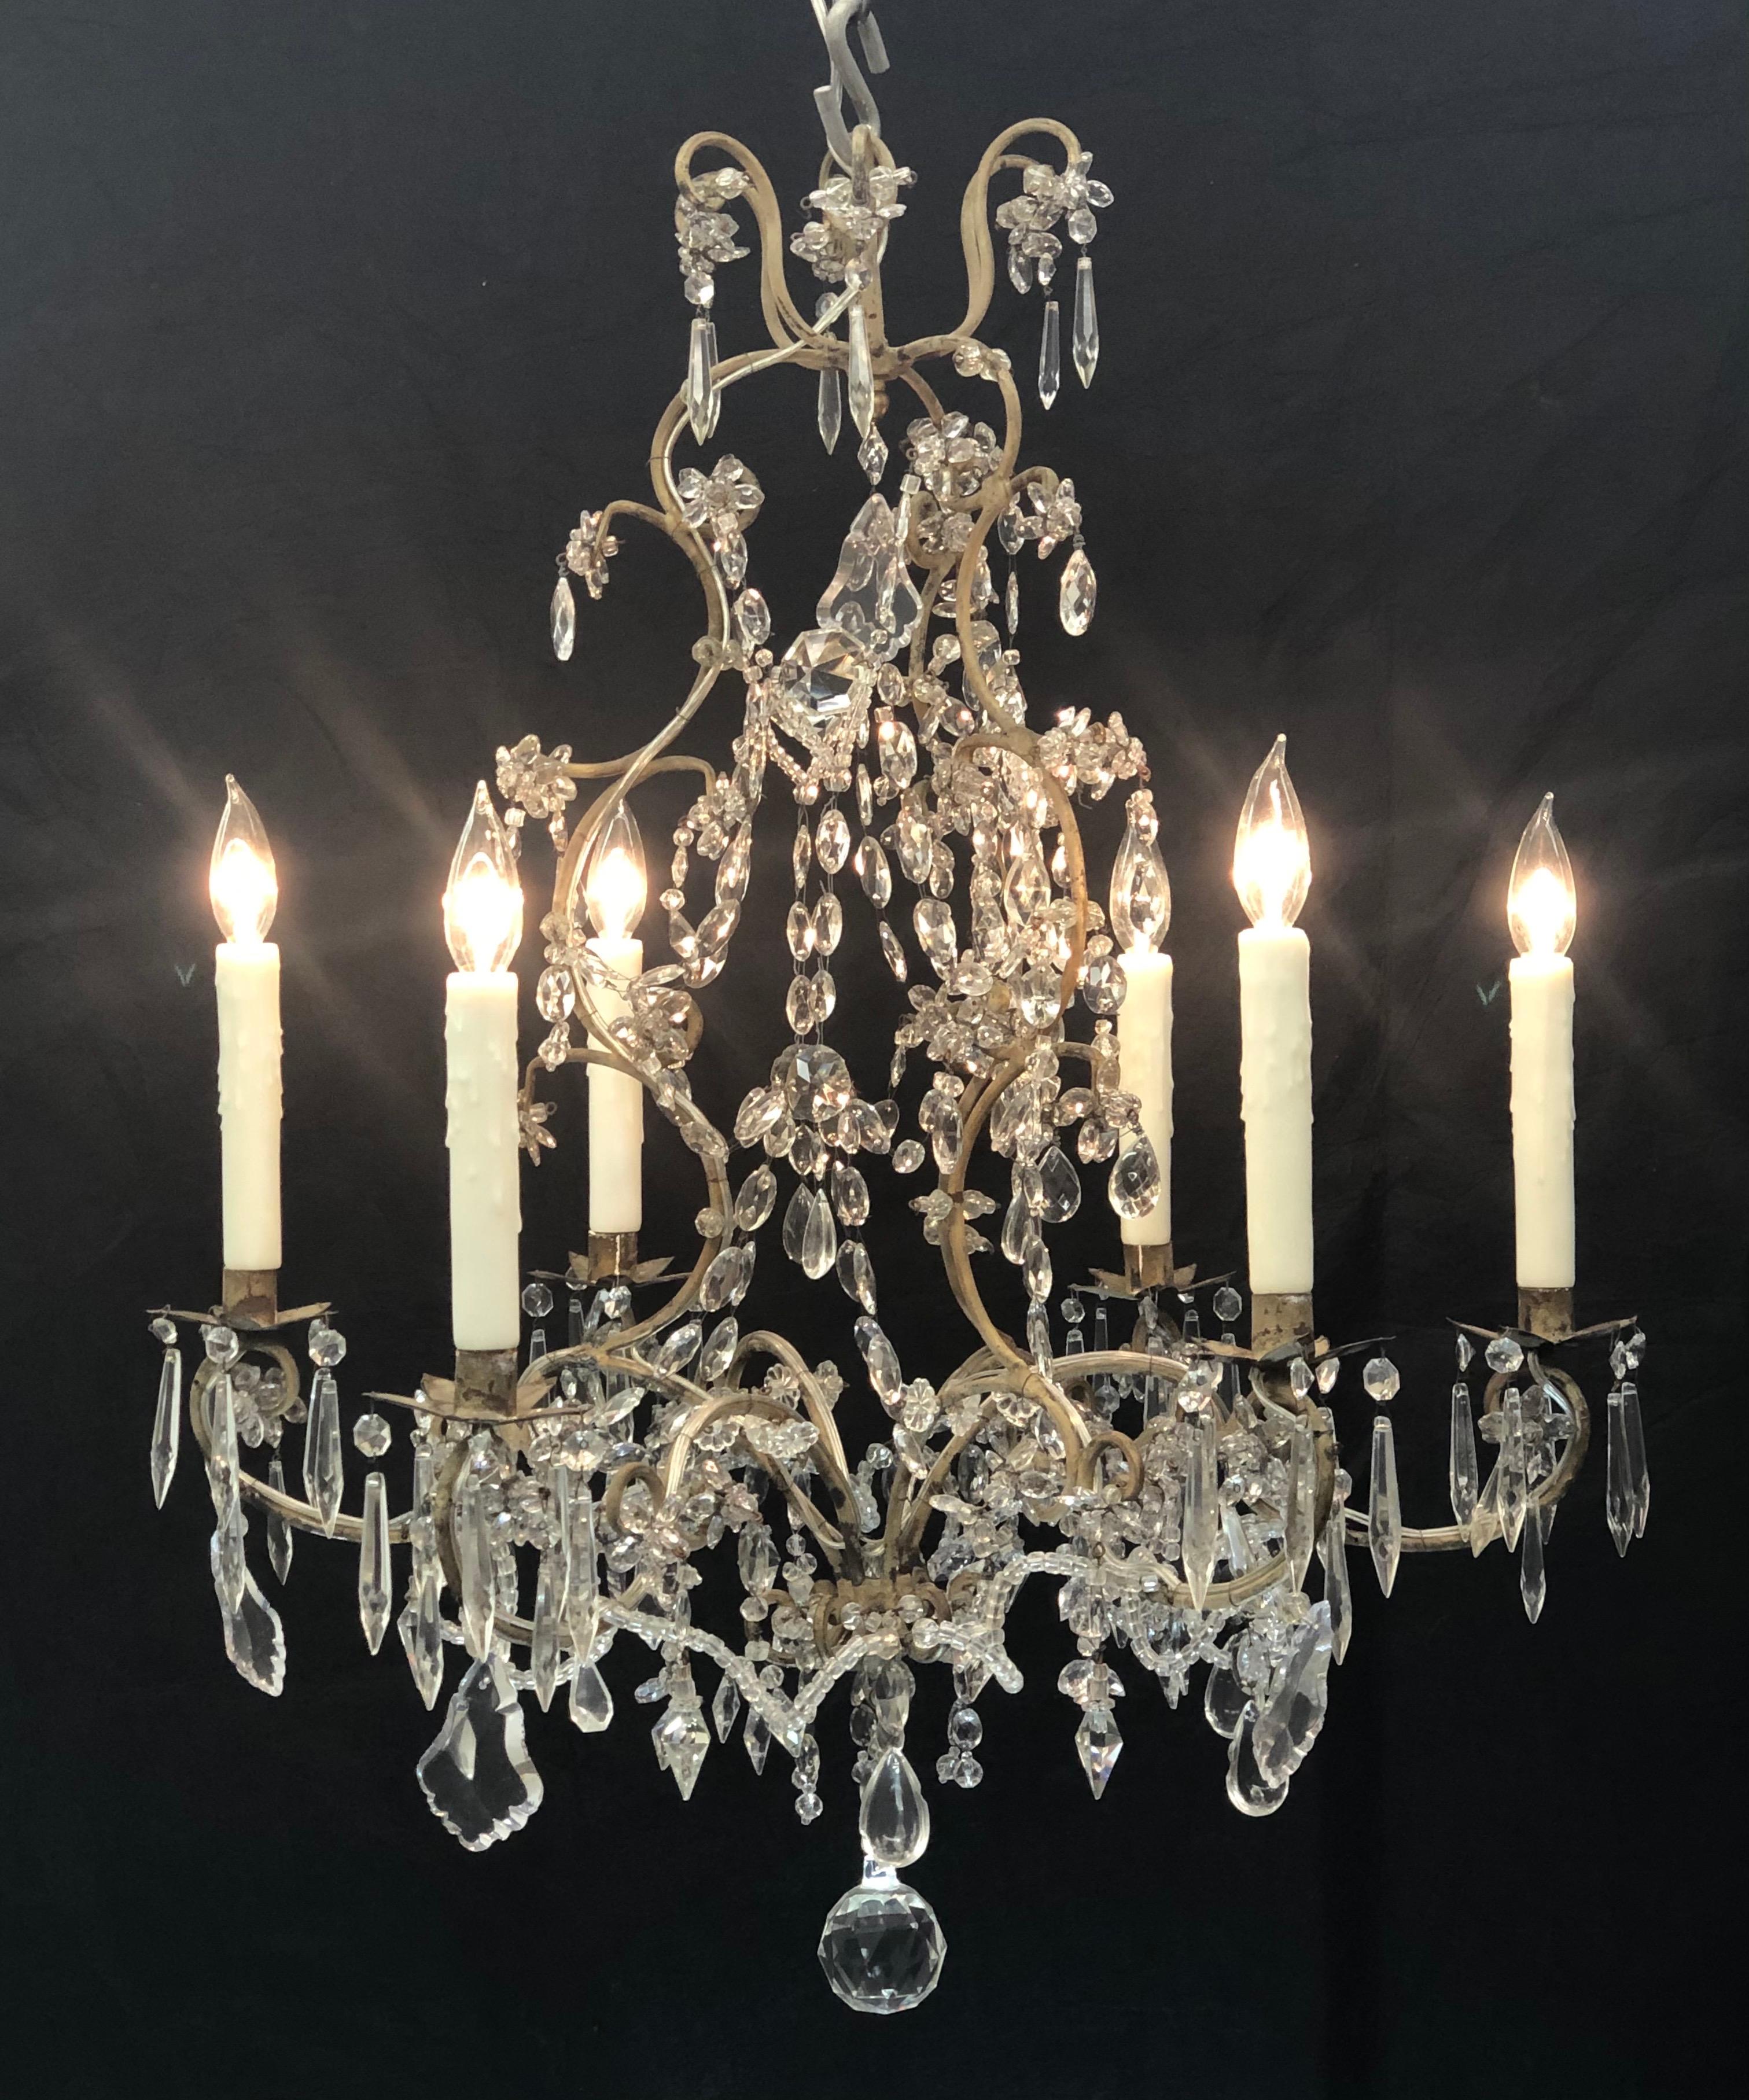 This Elegant Piedmont chandelier is in a Whimsical Chinoiserie Style. The early 19th century Orientalism styled chandelier was originally candle. The chandelier has a Tôle frame with six candle arm branches all decorated in fine hand cut crystal.